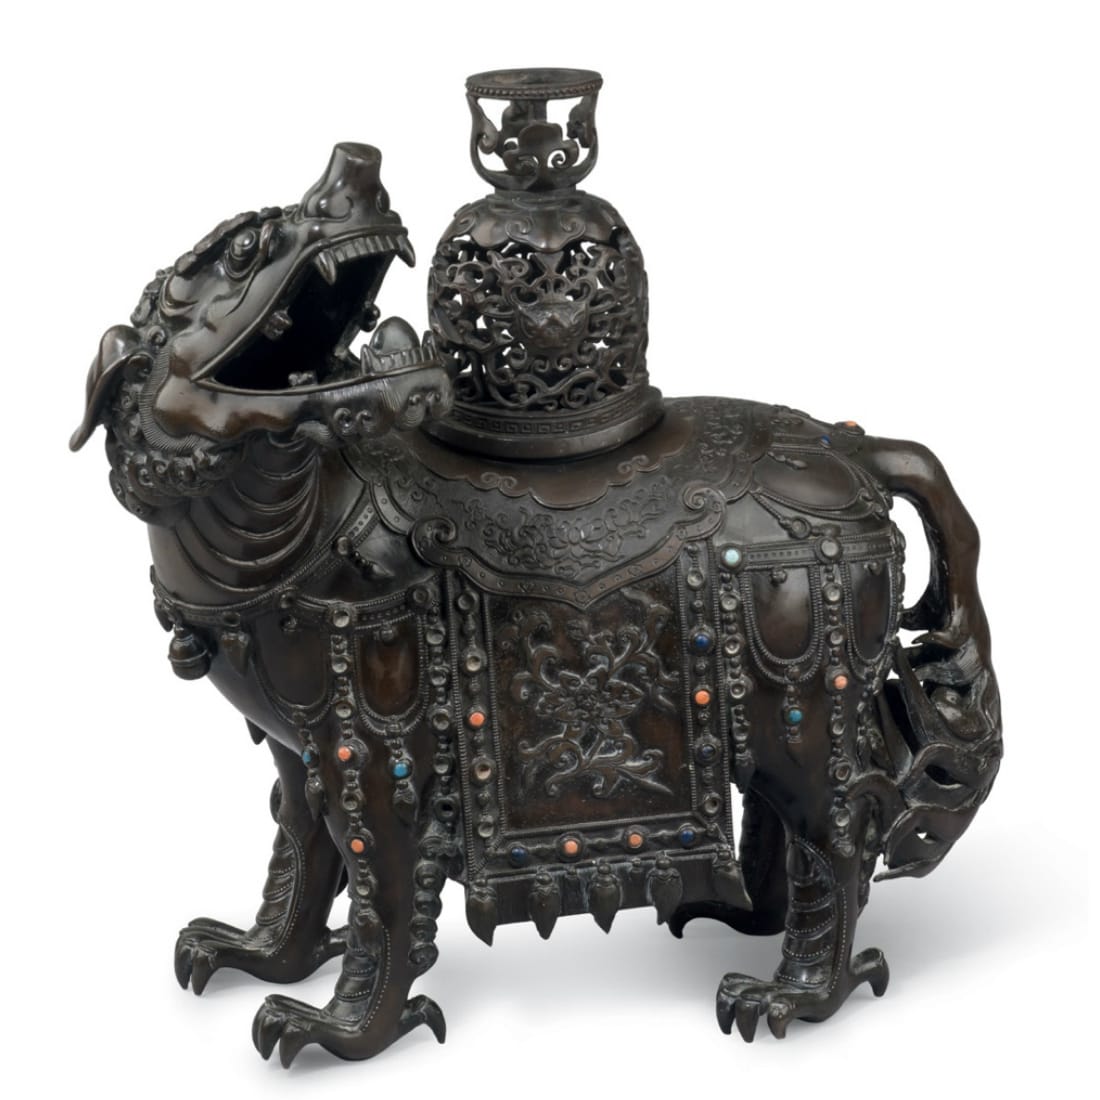 Bronze incense burner in the form of a lion-like mythical animal. China, 17th-18th century